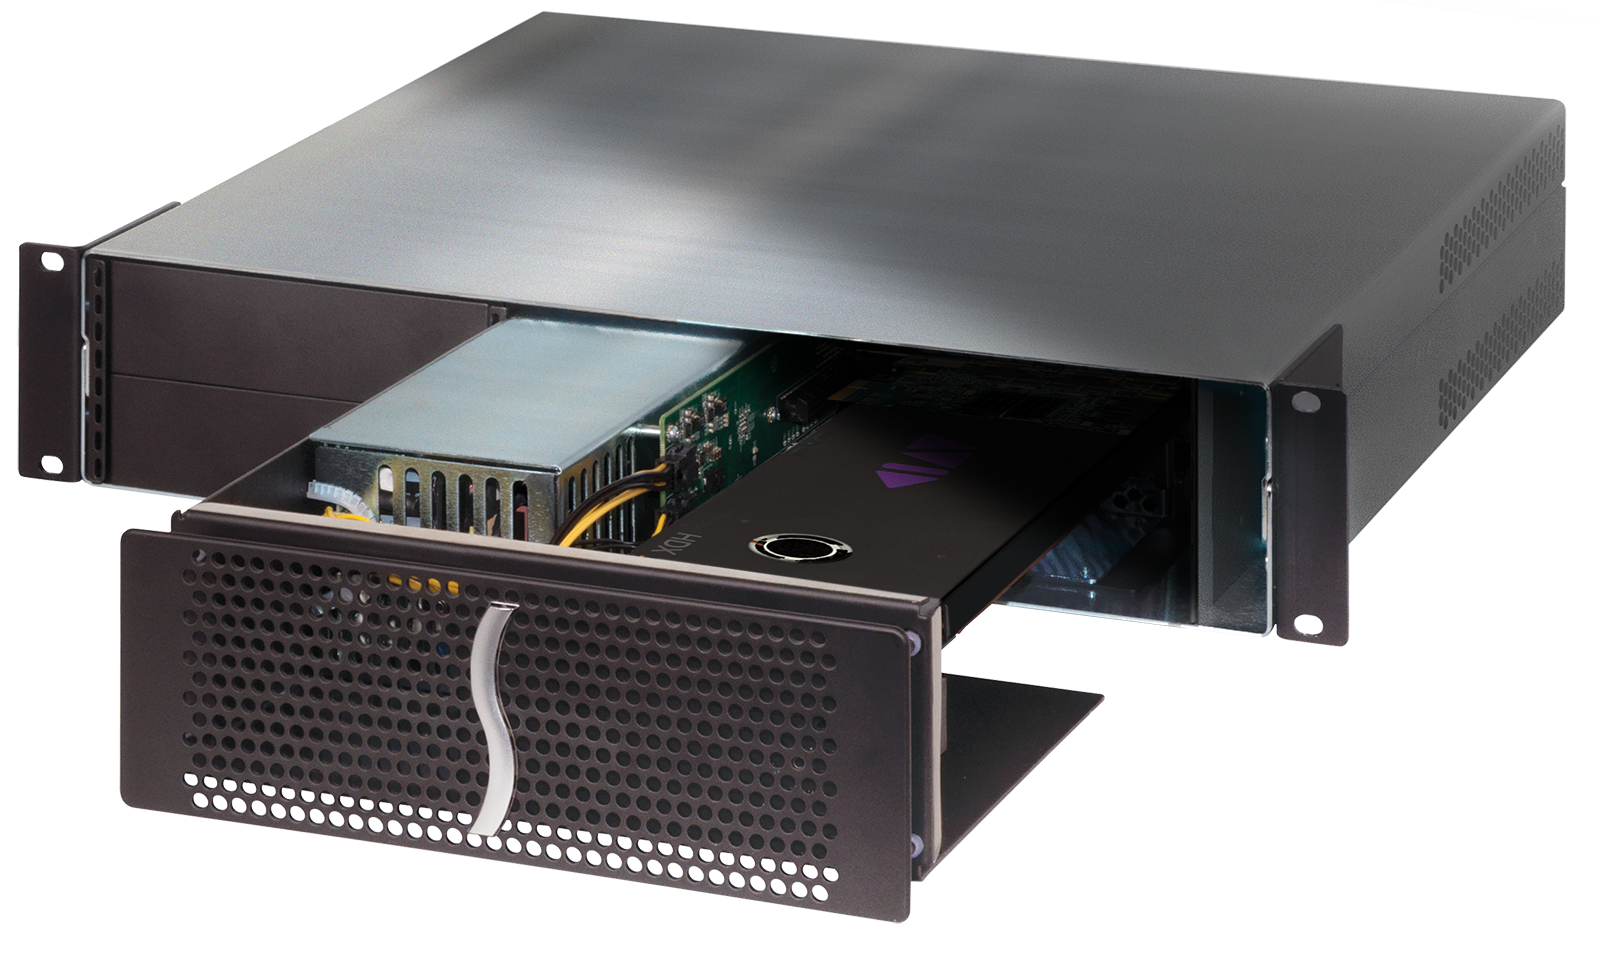 Echo Express III-D (Thunderbolt 3 HDX Edition) with Avid HDX Cards